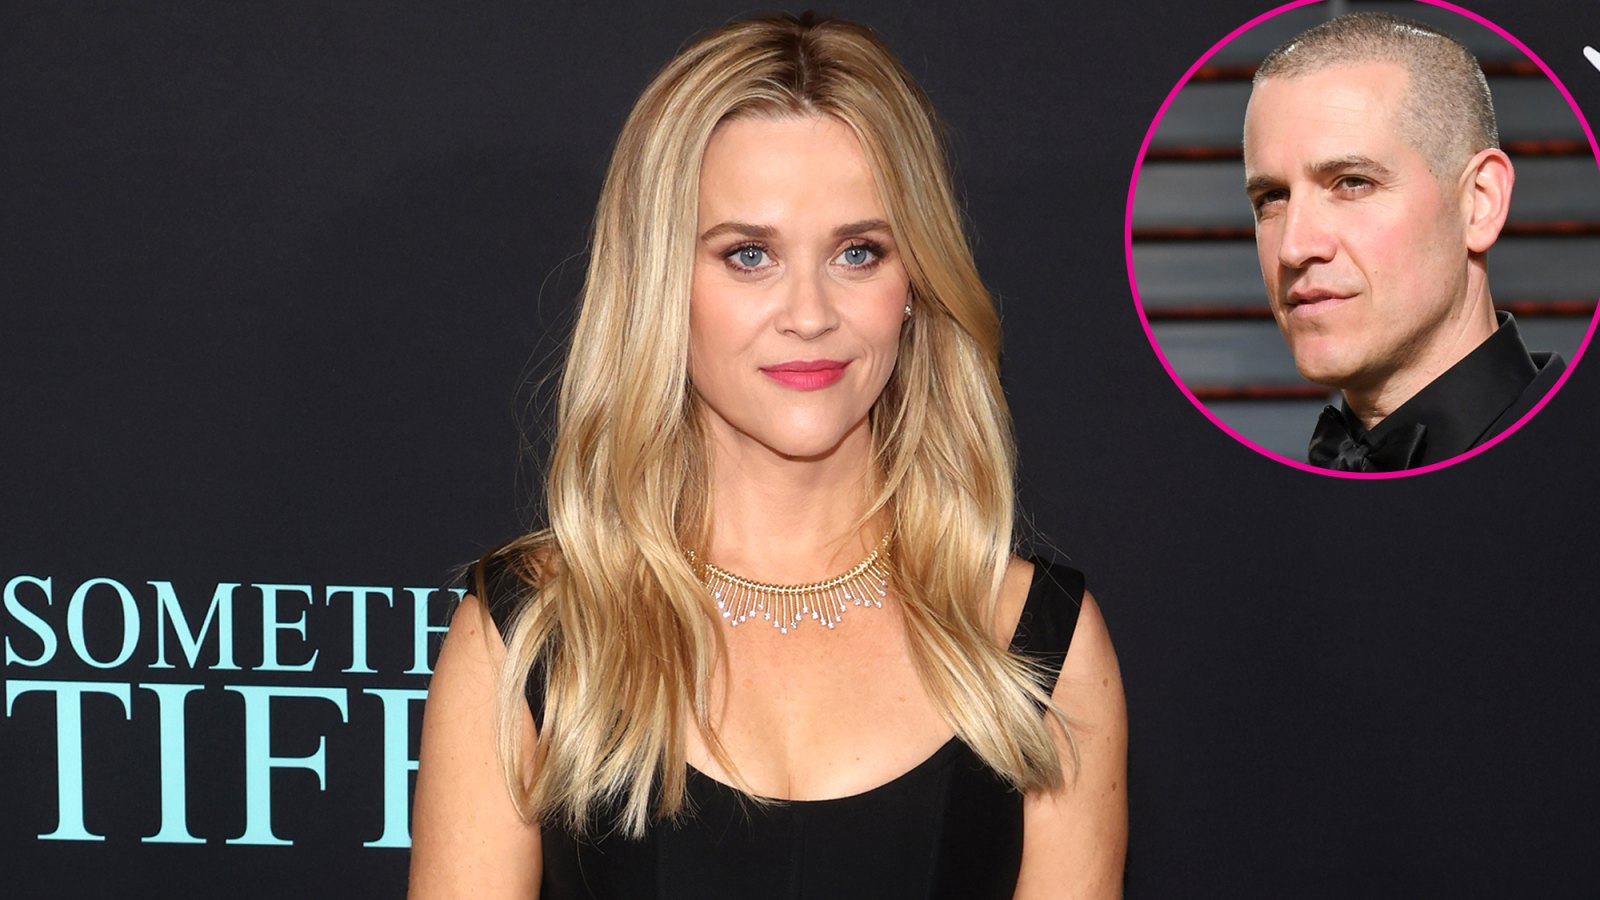 Reese Witherspoon Opens Up About Divorce From Jim Toth: ‘It’s a Vulnerable Time for Me’